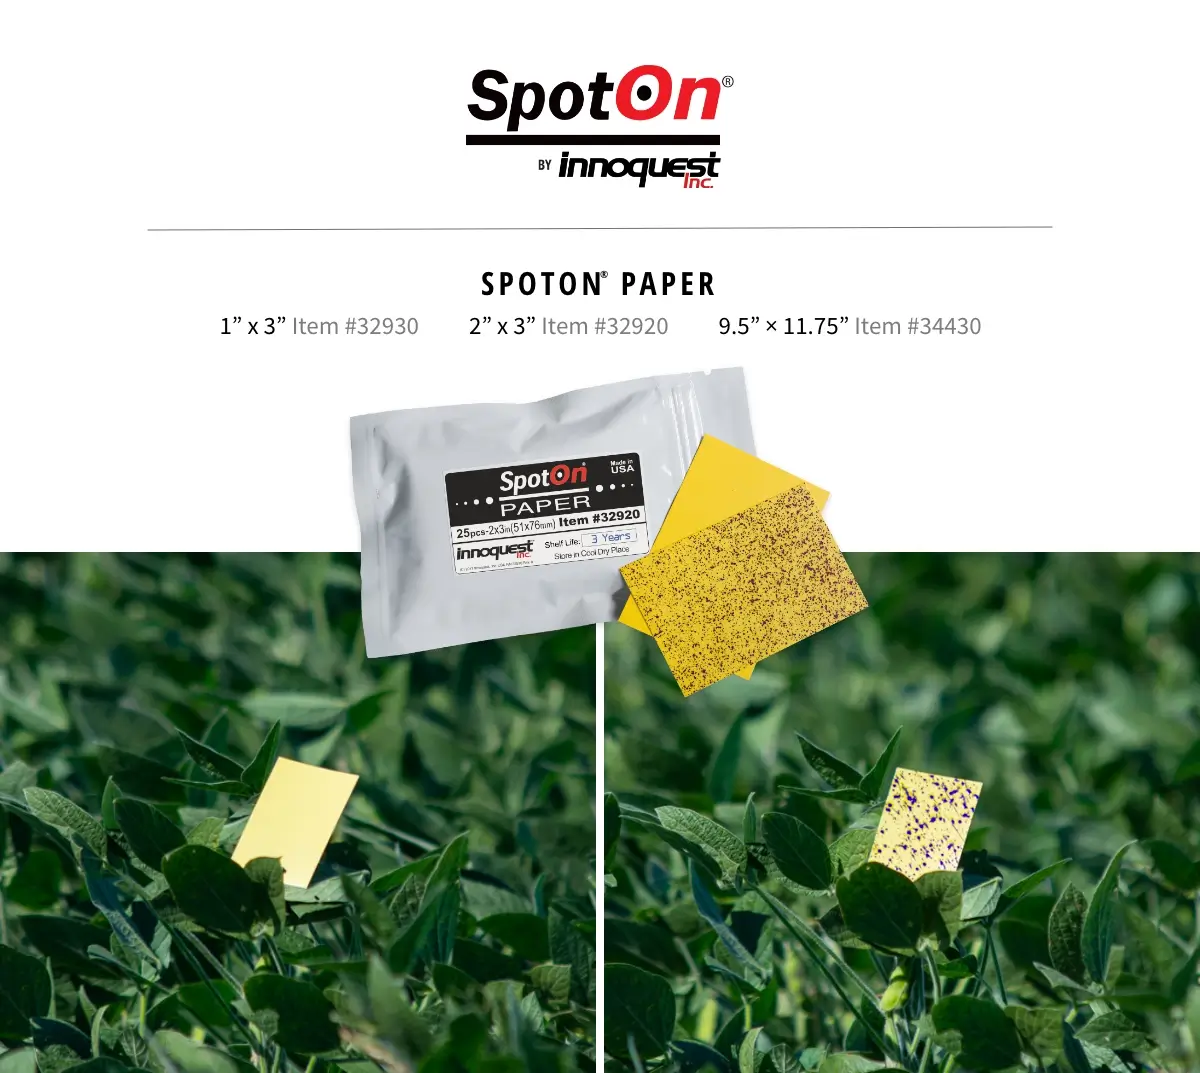 Water sensitive paper for agriculture spraying shows droplets for proper sprayer assessment.